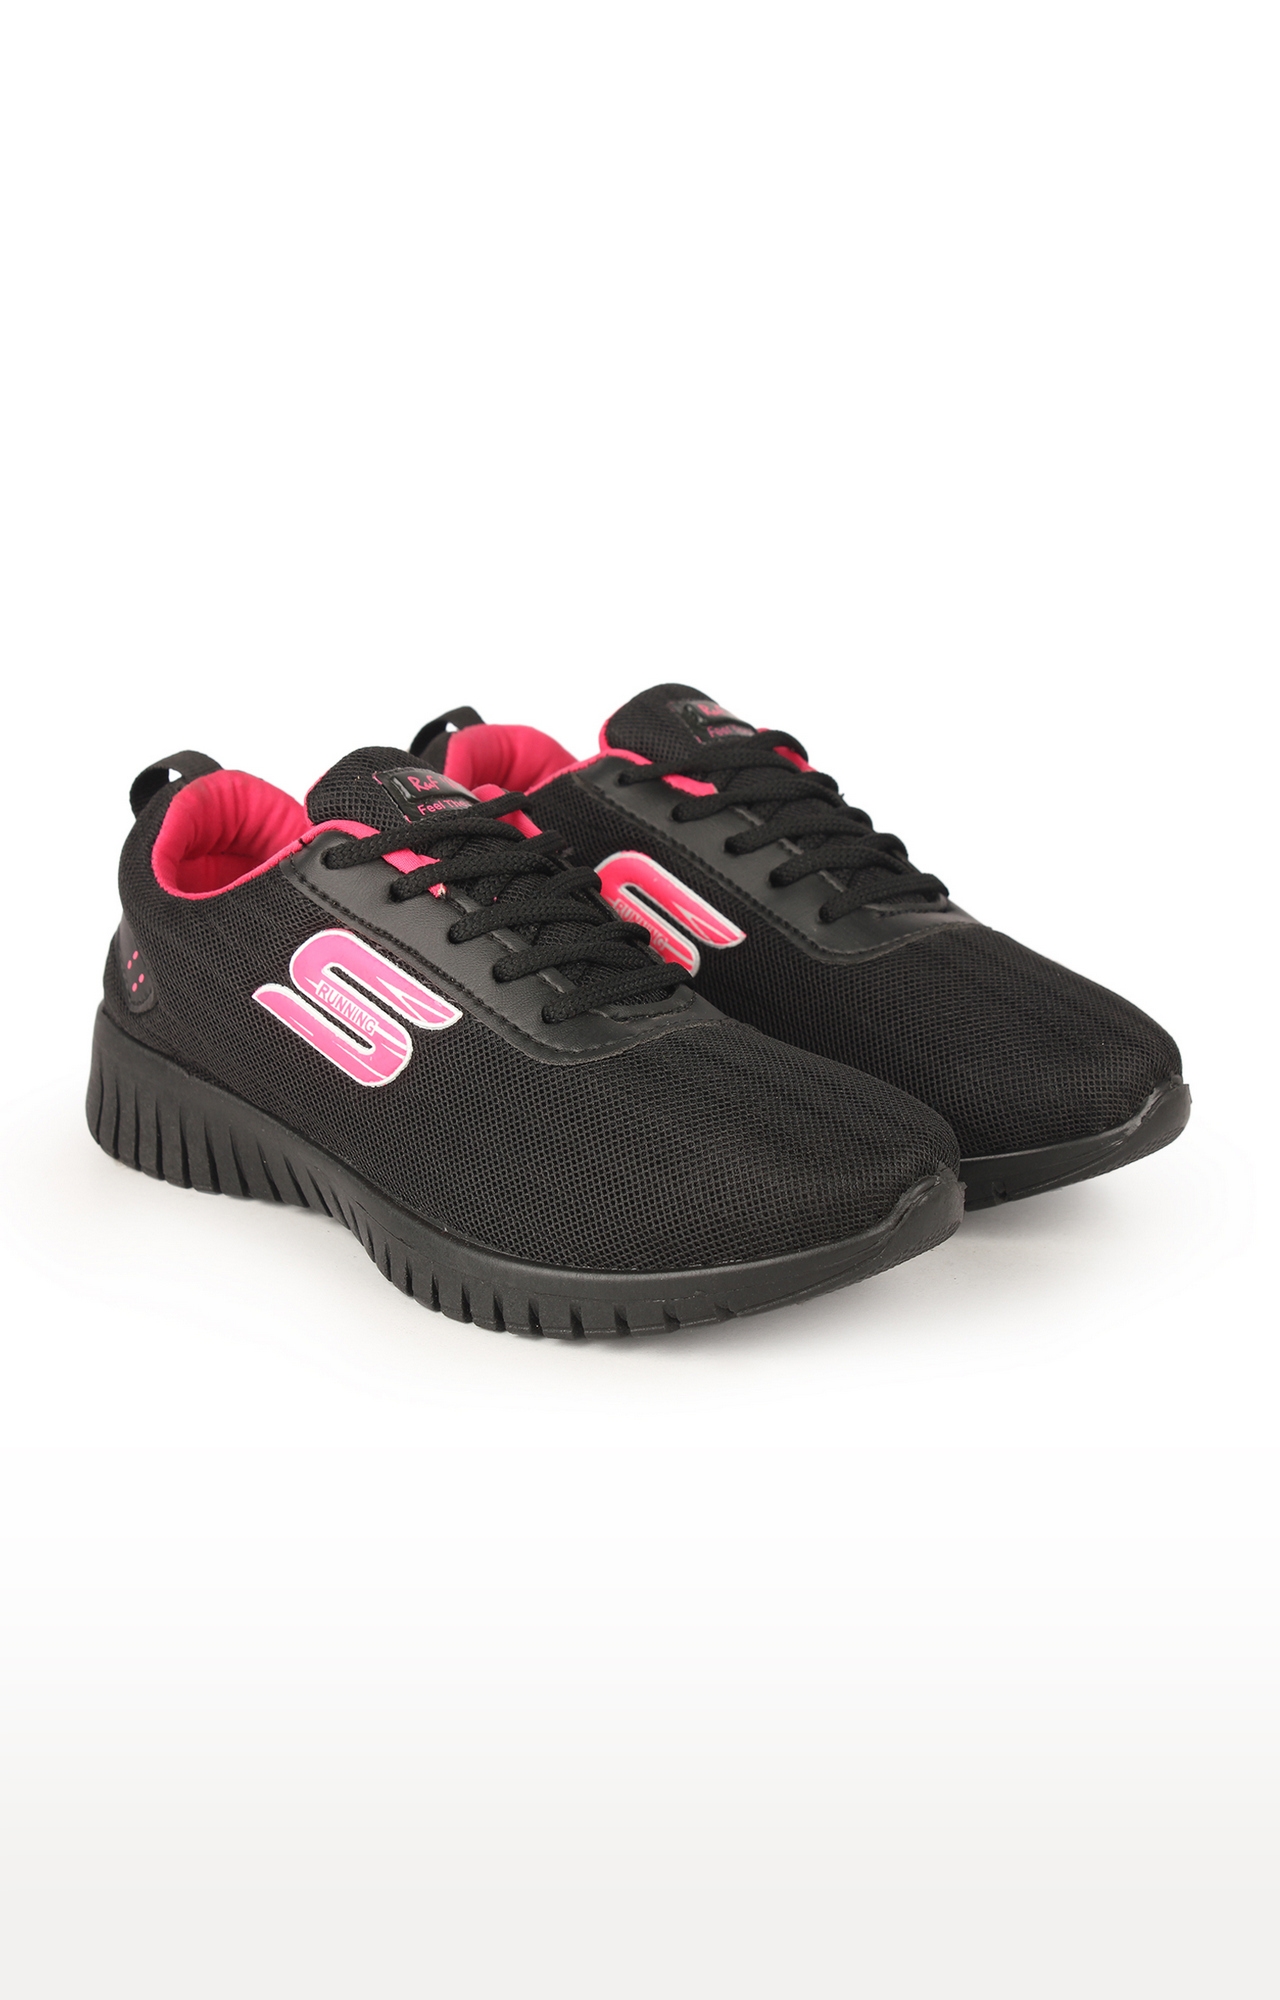 RNT Sketch 01 Black and Pink Shoes for Women